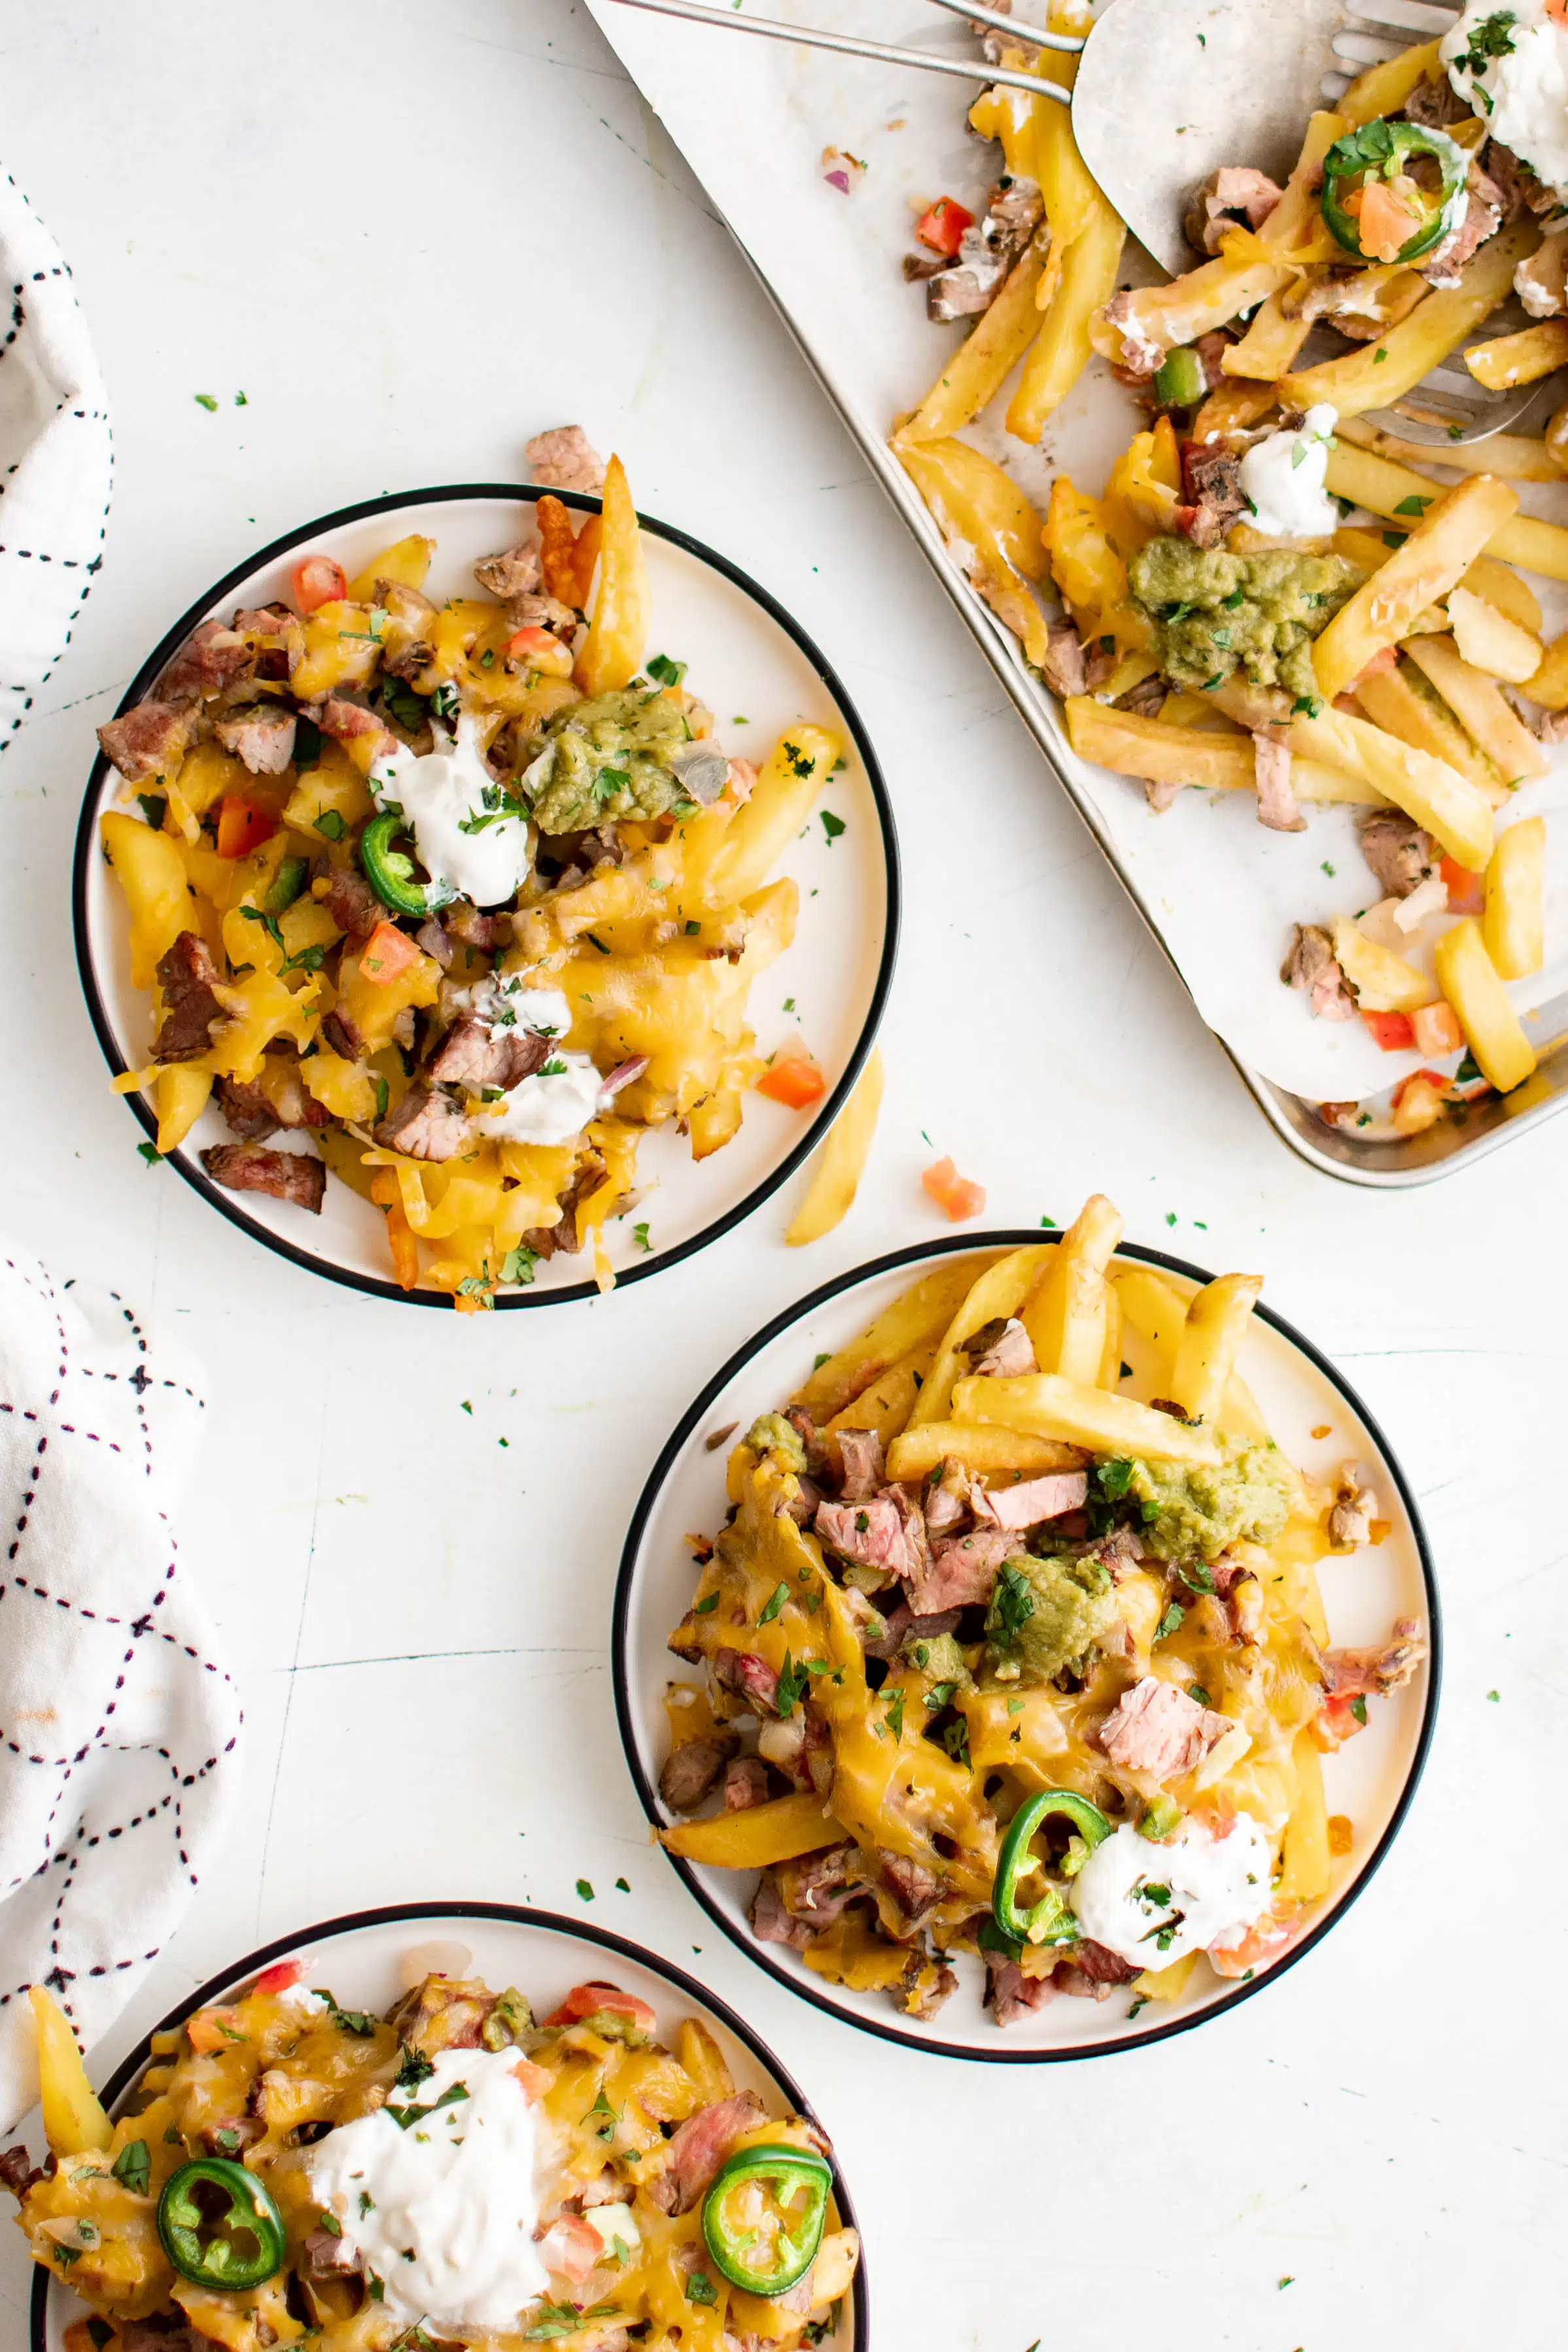 Three small serving plates filled with carne asada fries topped with sour cream next to a large baking sheet filled with the remaining carne asada nachos.